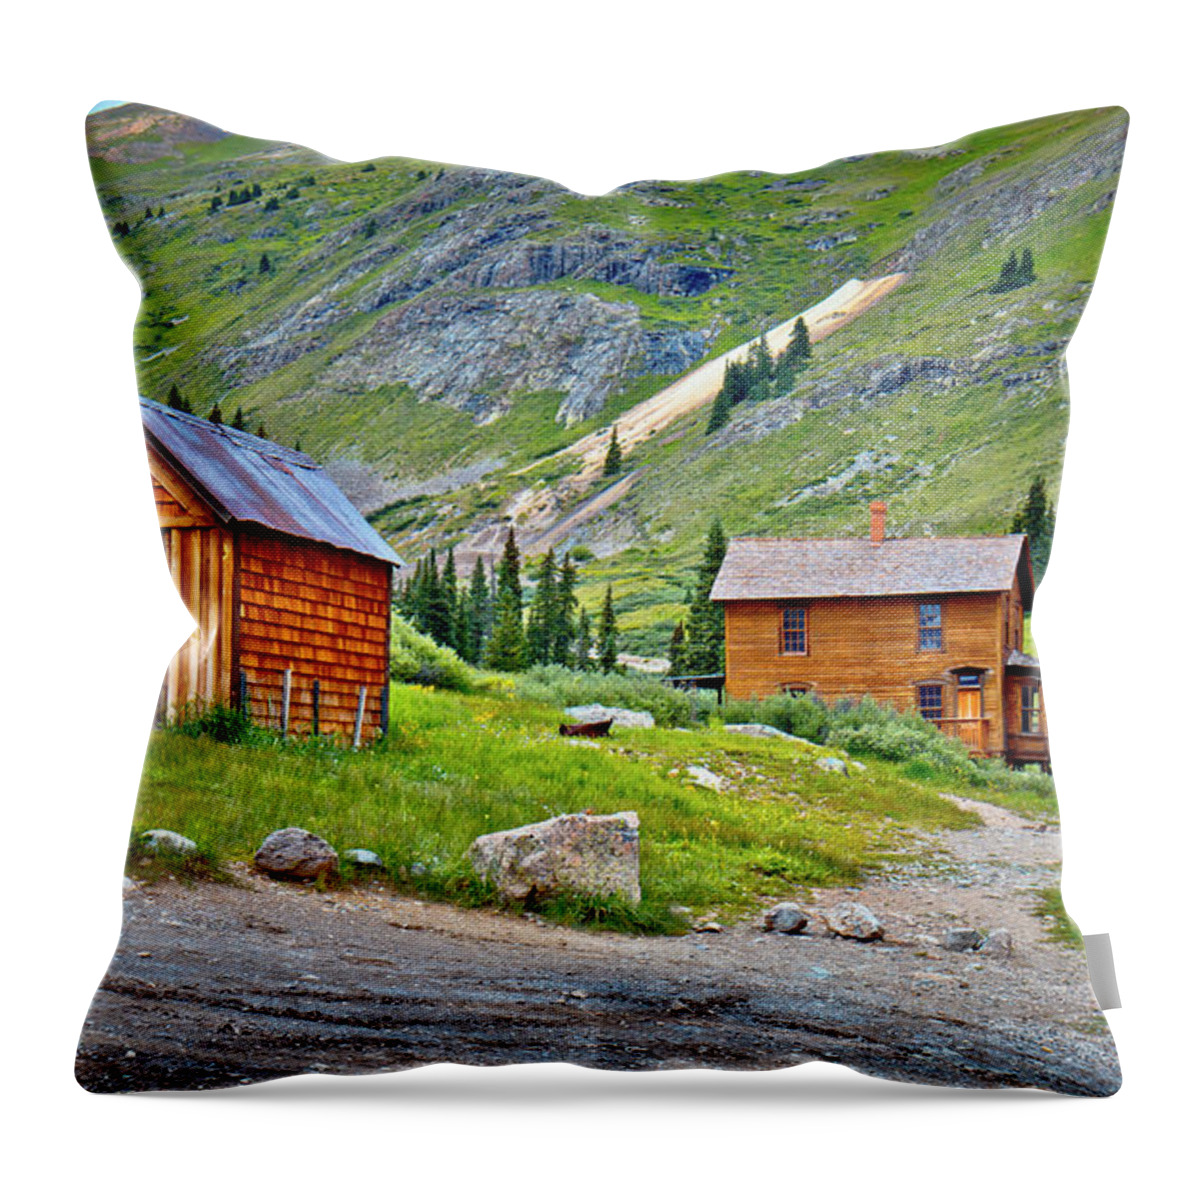 Animas Forks Throw Pillow featuring the photograph Animas Forks Ghost Town by Linda Unger